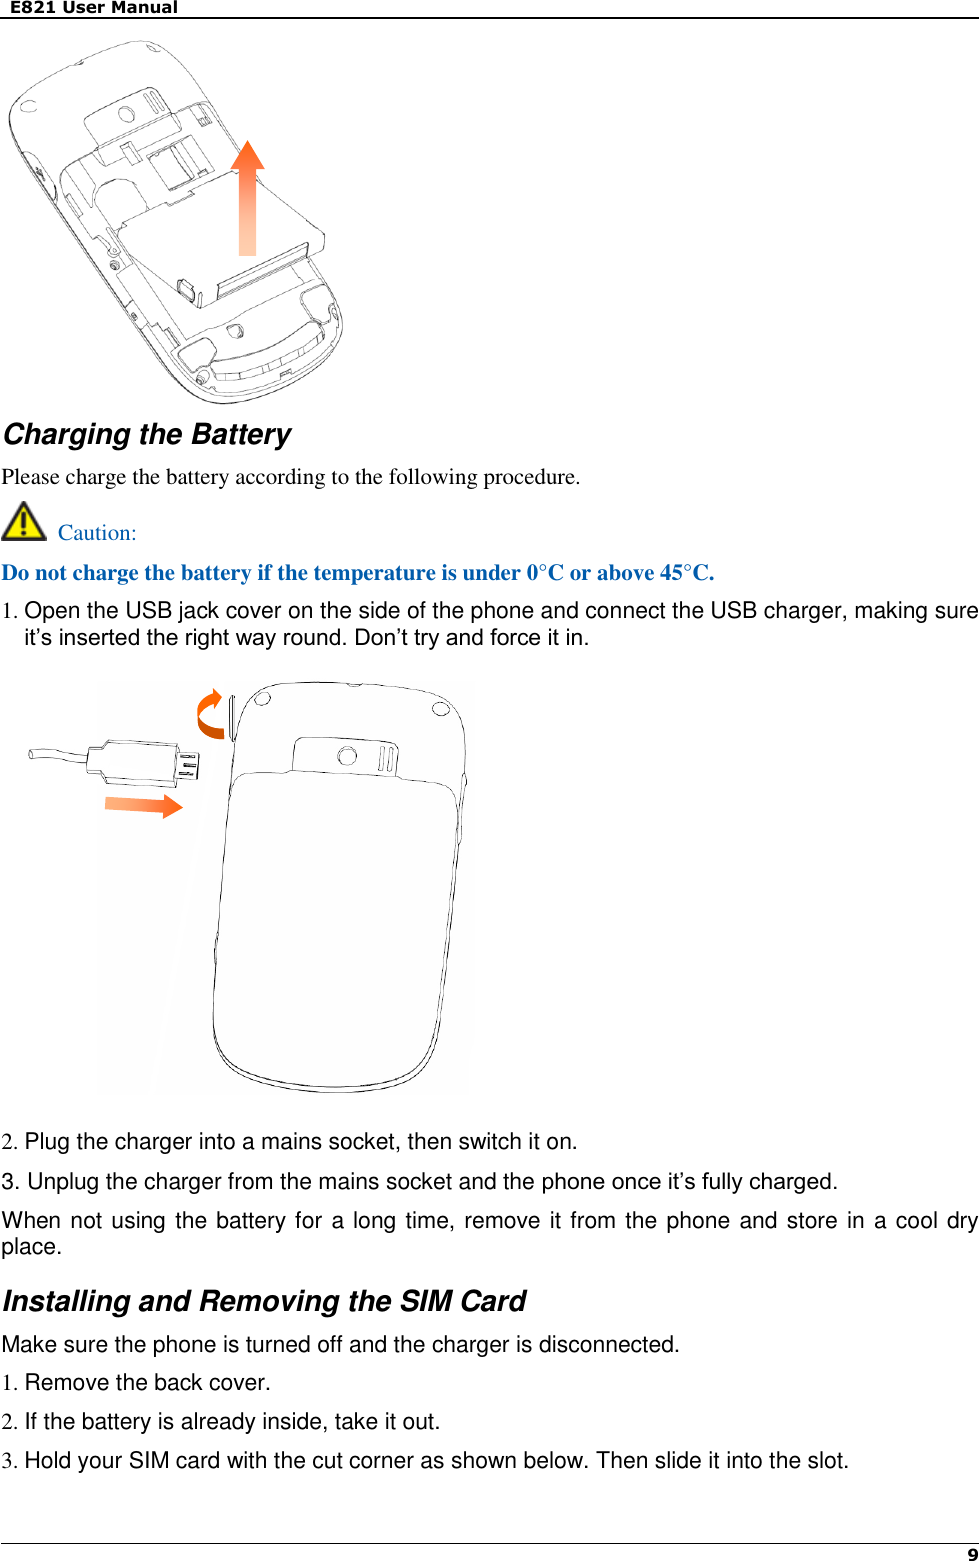   E821 User Manual    9             Charging the Battery Please charge the battery according to the following procedure.   Caution: Do not charge the battery if the temperature is under 0°C or above 45°C. 1. Open the USB jack cover on the side of the phone and connect the USB charger, making sure it’s inserted the right way round. Don’t try and force it in.             2. Plug the charger into a mains socket, then switch it on. 3. Unplug the charger from the mains socket and the phone once it’s fully charged. When not using the battery for a long time, remove it from the phone and store in a cool dry place. Installing and Removing the SIM Card Make sure the phone is turned off and the charger is disconnected. 1. Remove the back cover. 2. If the battery is already inside, take it out. 3. Hold your SIM card with the cut corner as shown below. Then slide it into the slot.  